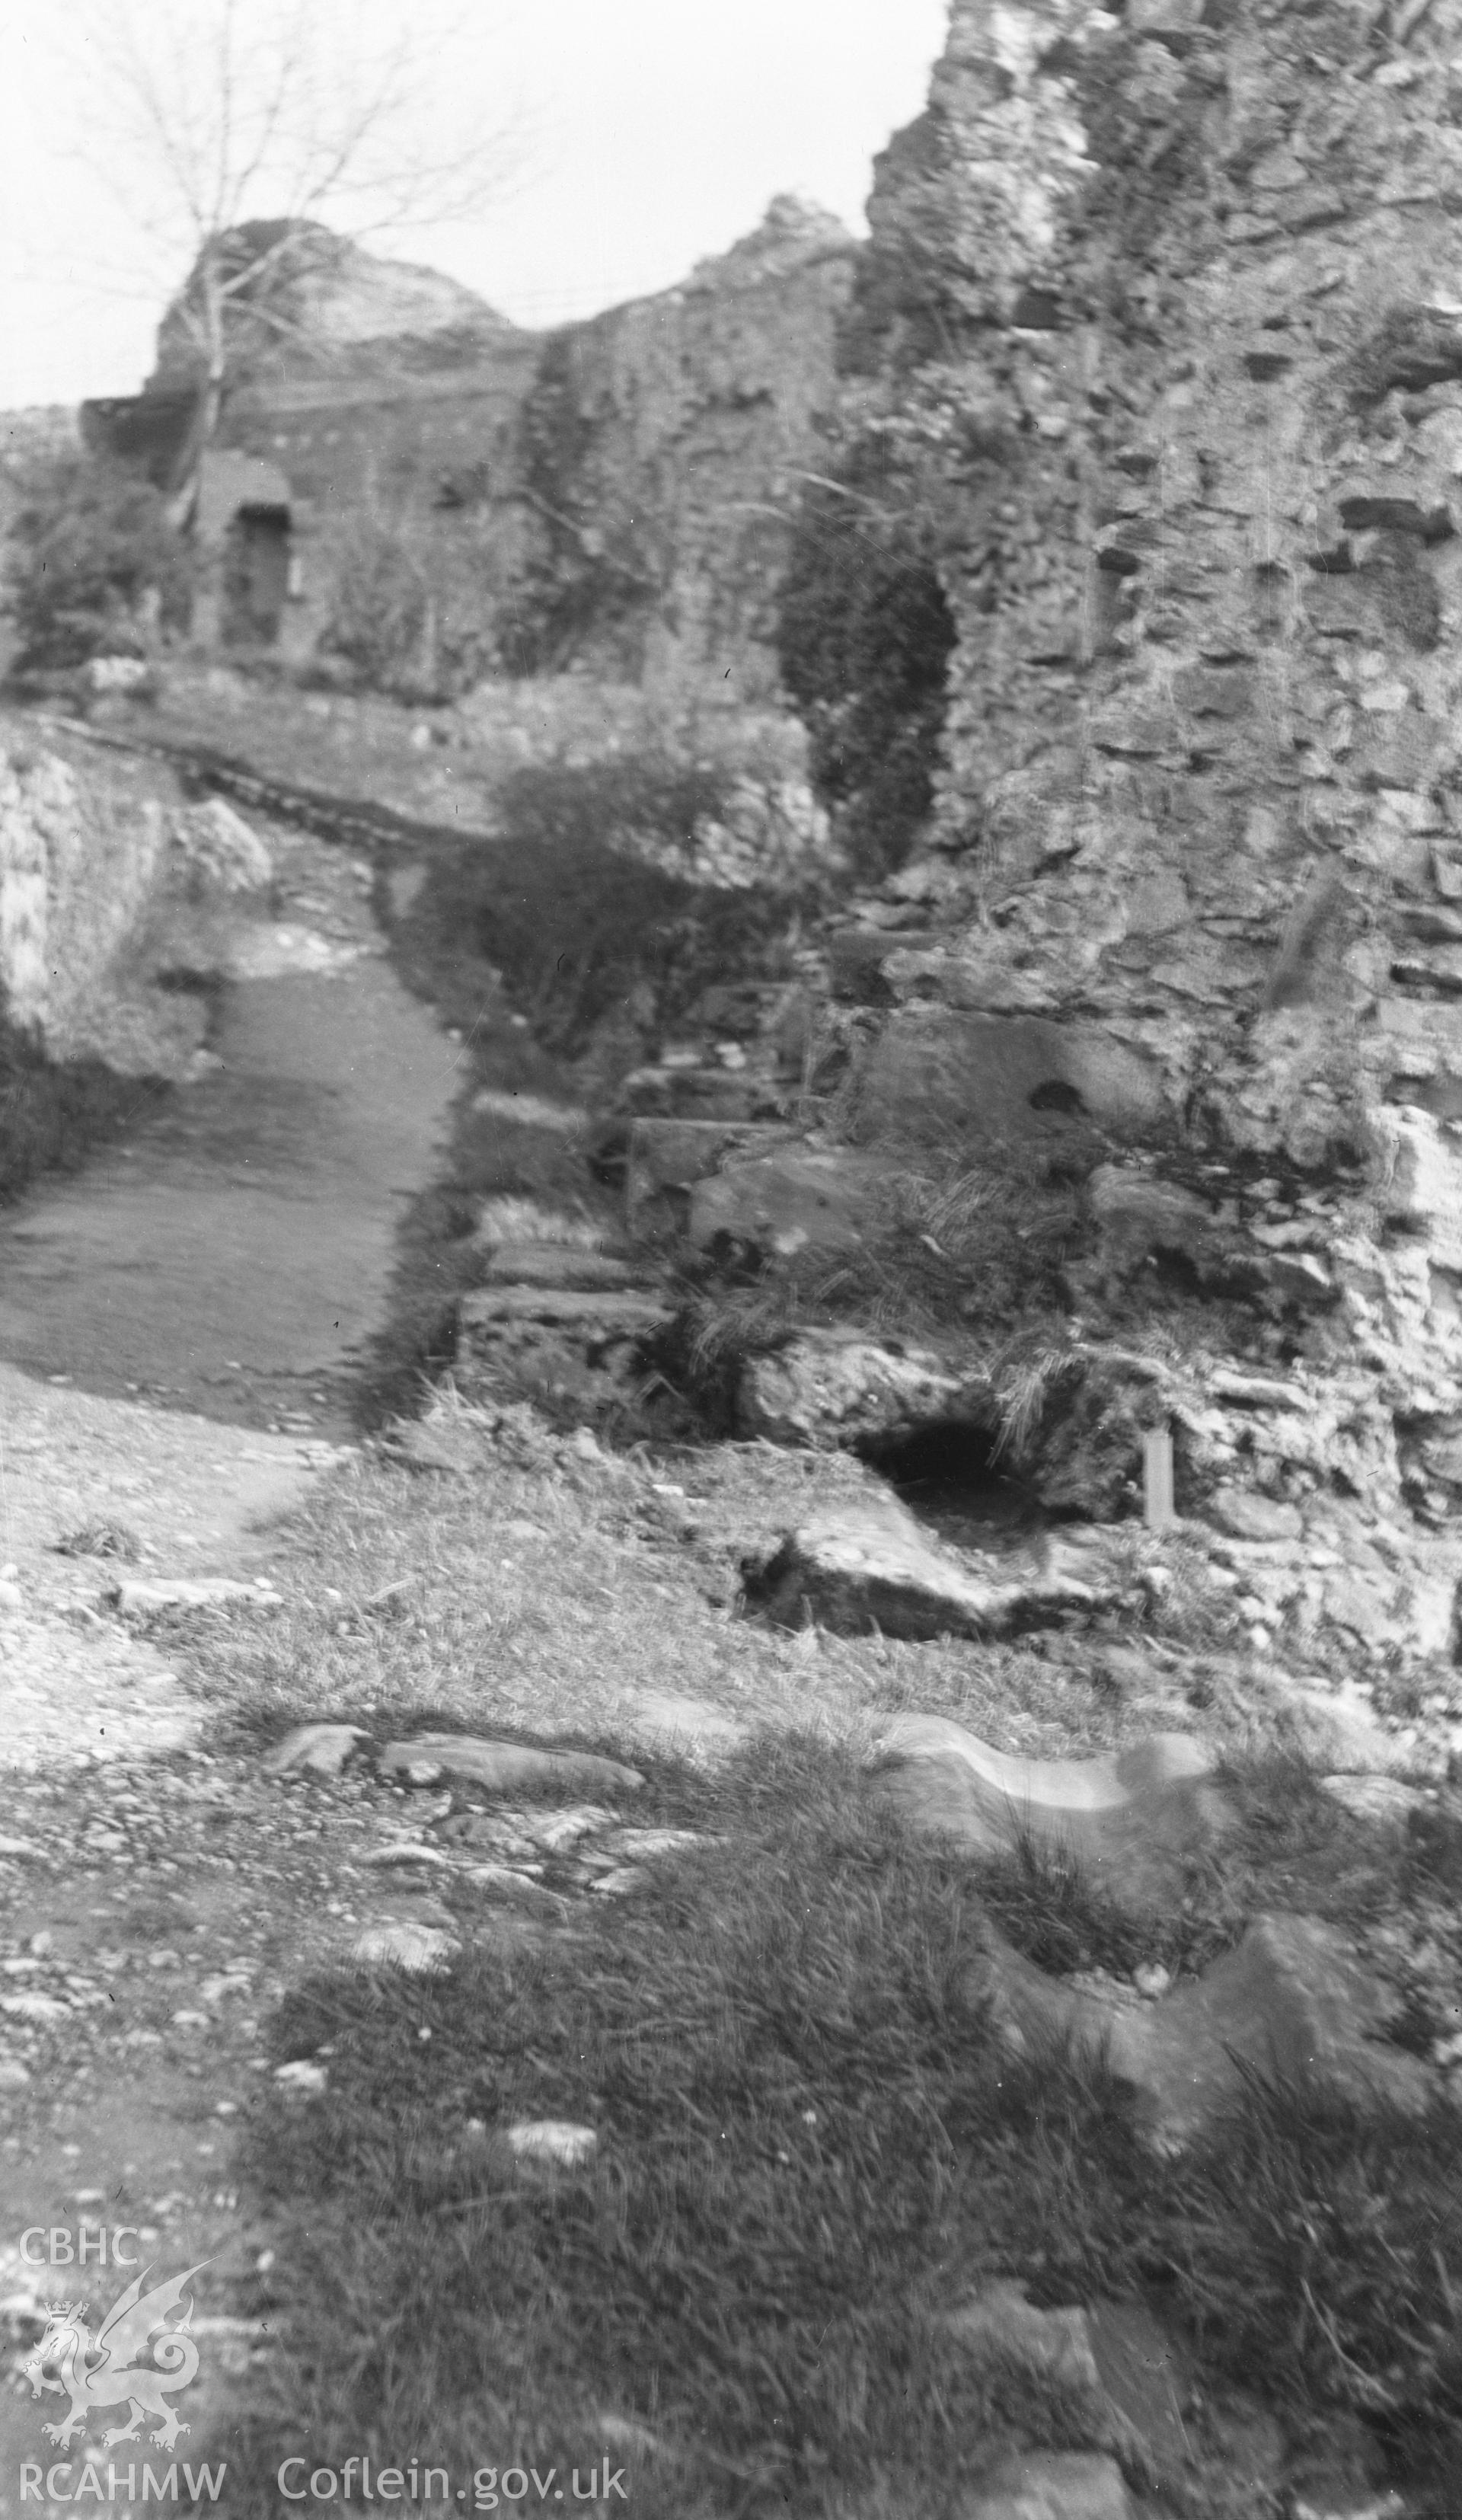 Digital copy of a nitrate negative showing view of Denbigh Castle, taken by RCAHMW, undated.